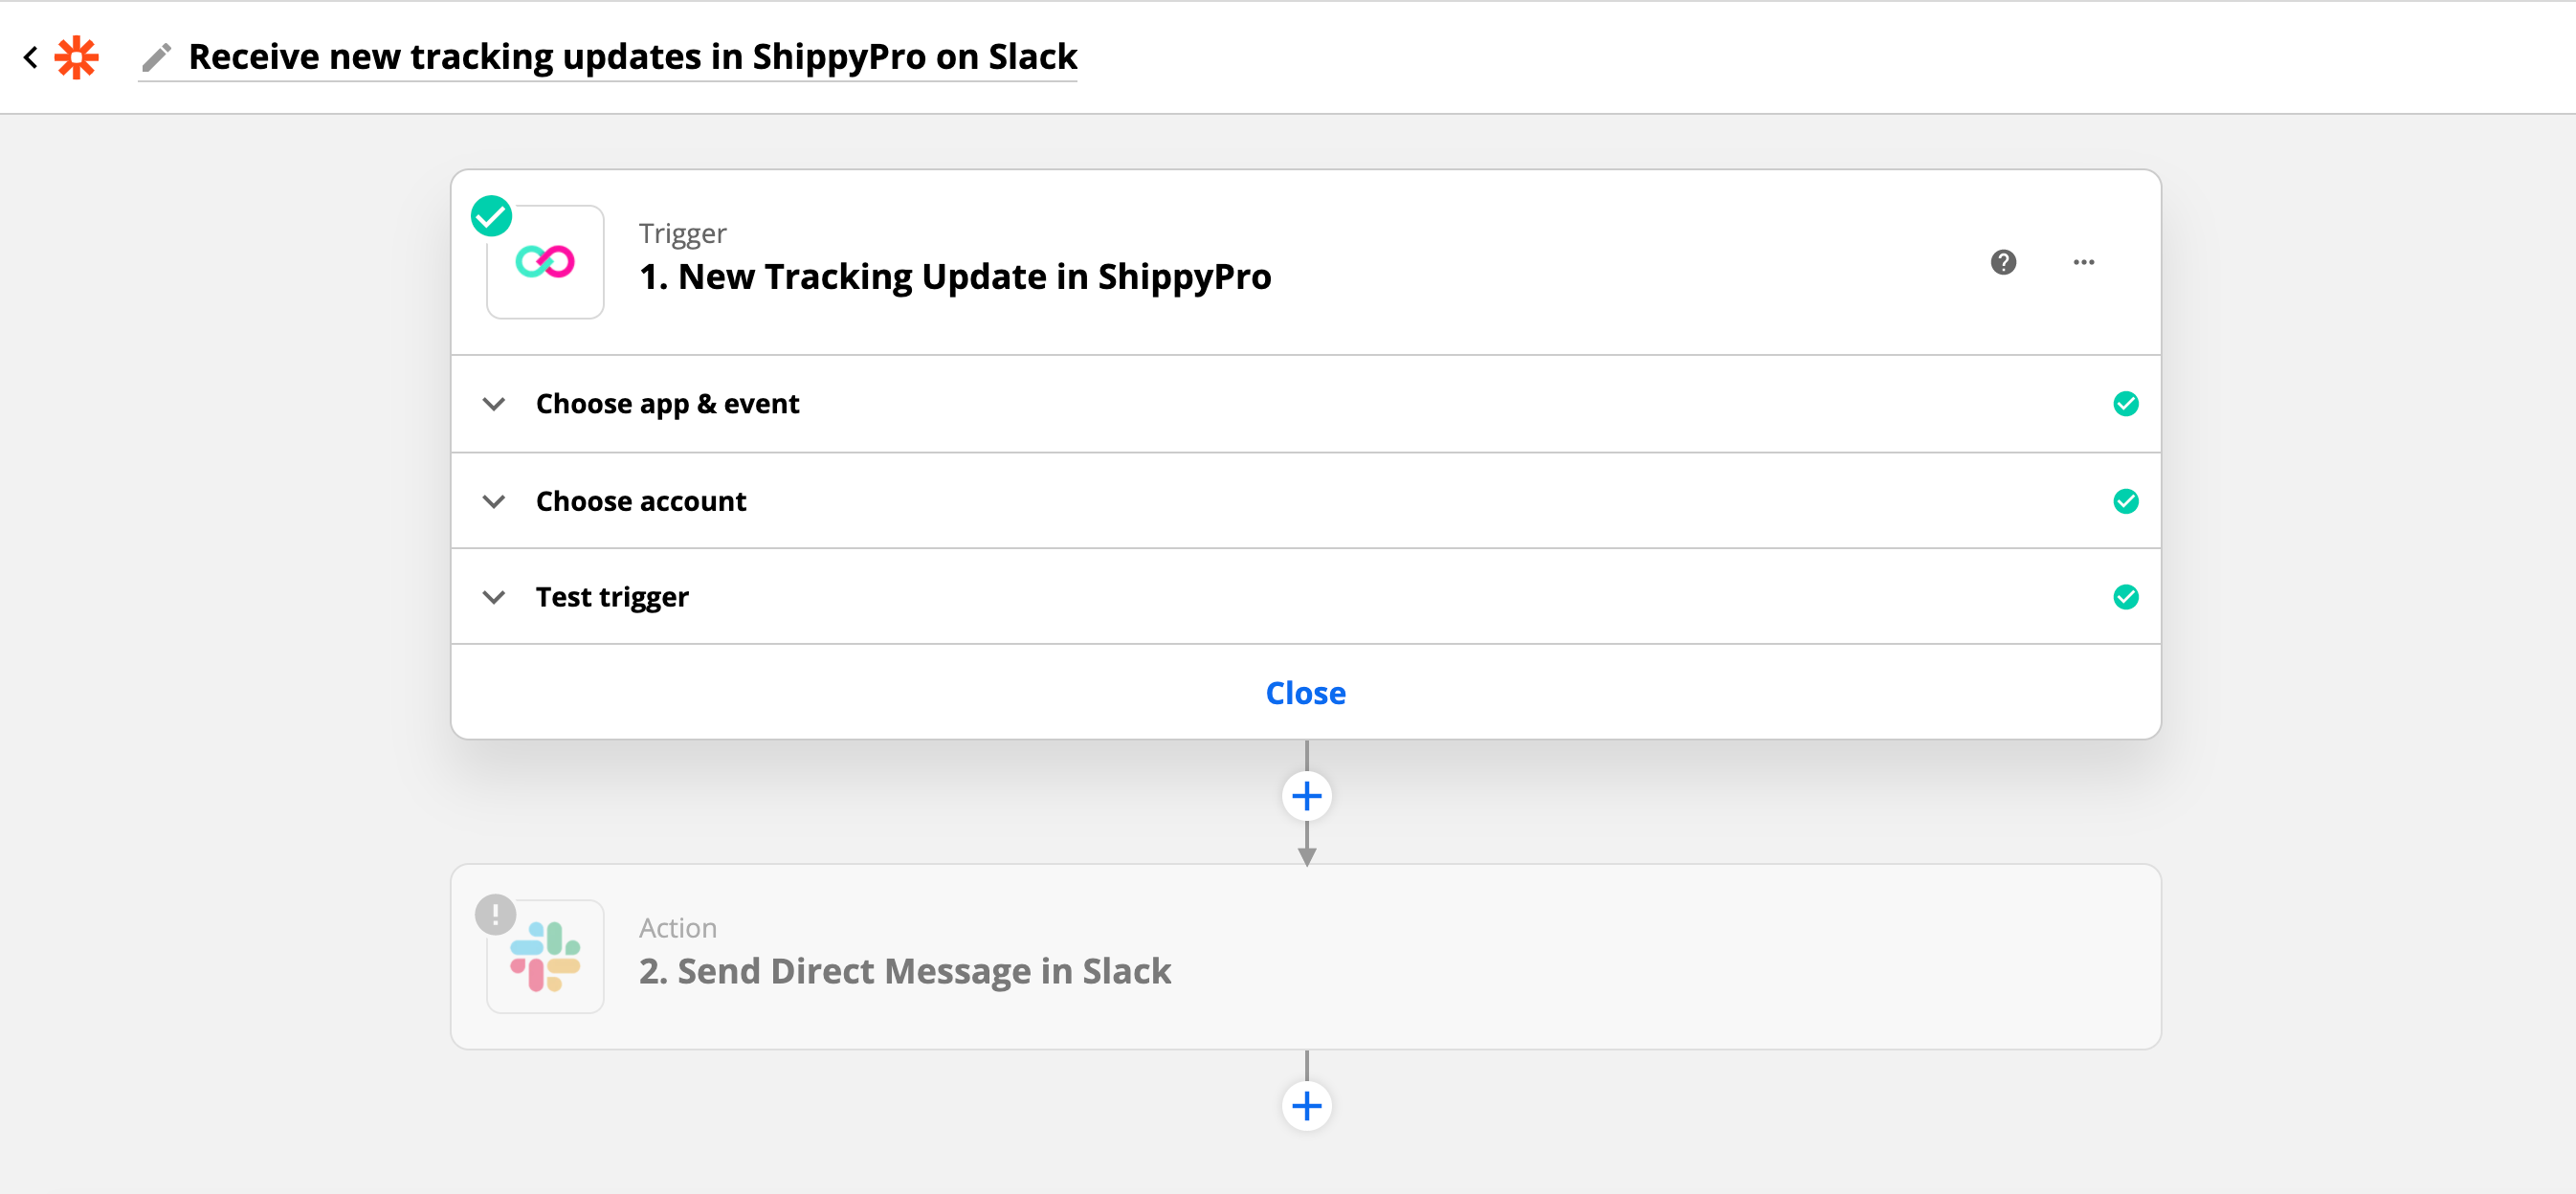 How to receive ShippyPro tracking updates in Slack